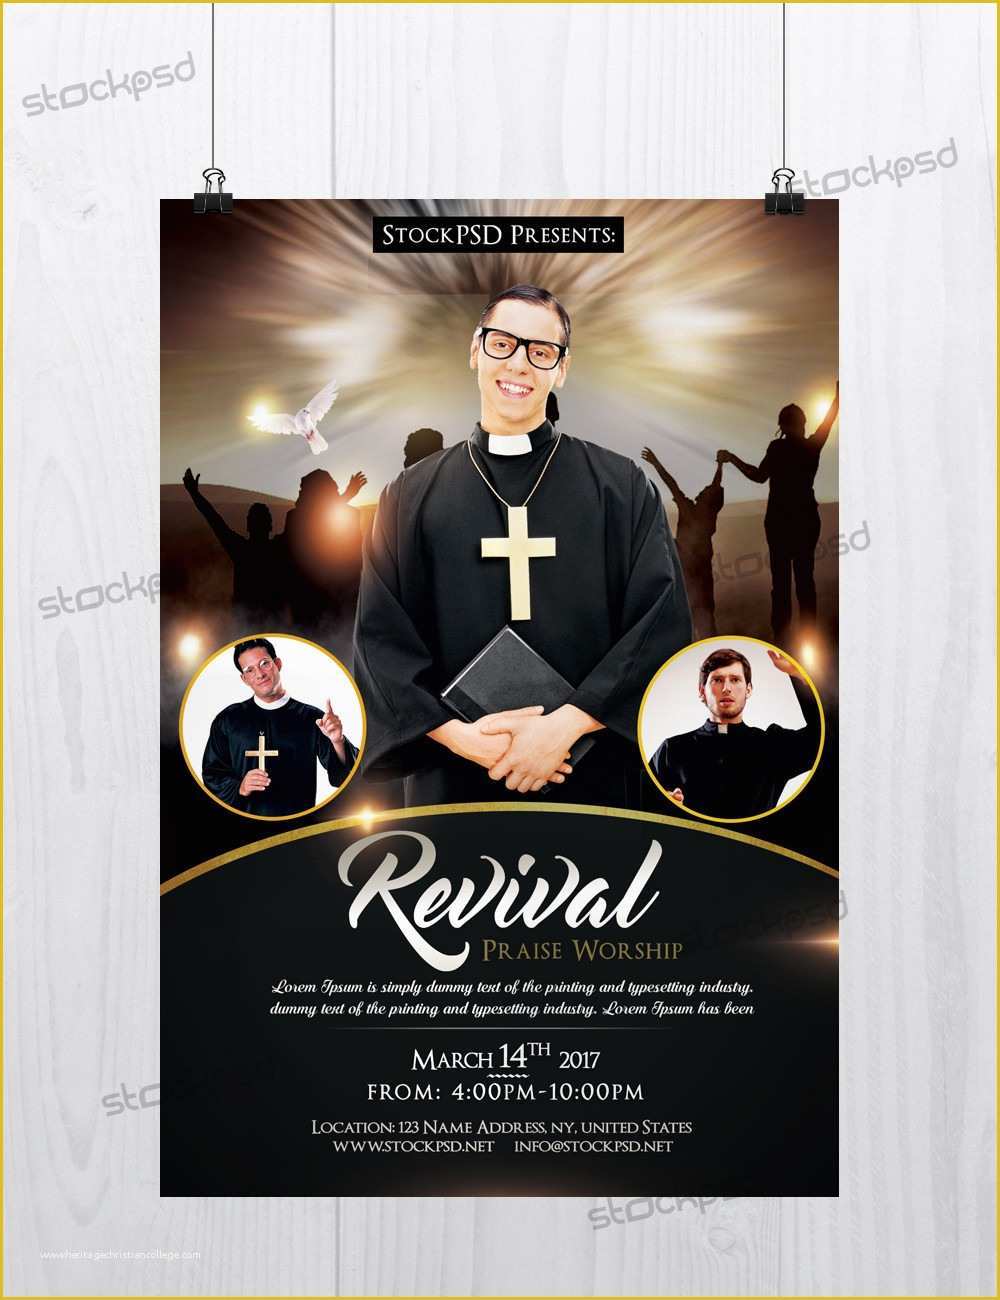 Free Church Flyer Templates Of Revival Church & Pastor Freebie Psd Flyer Template